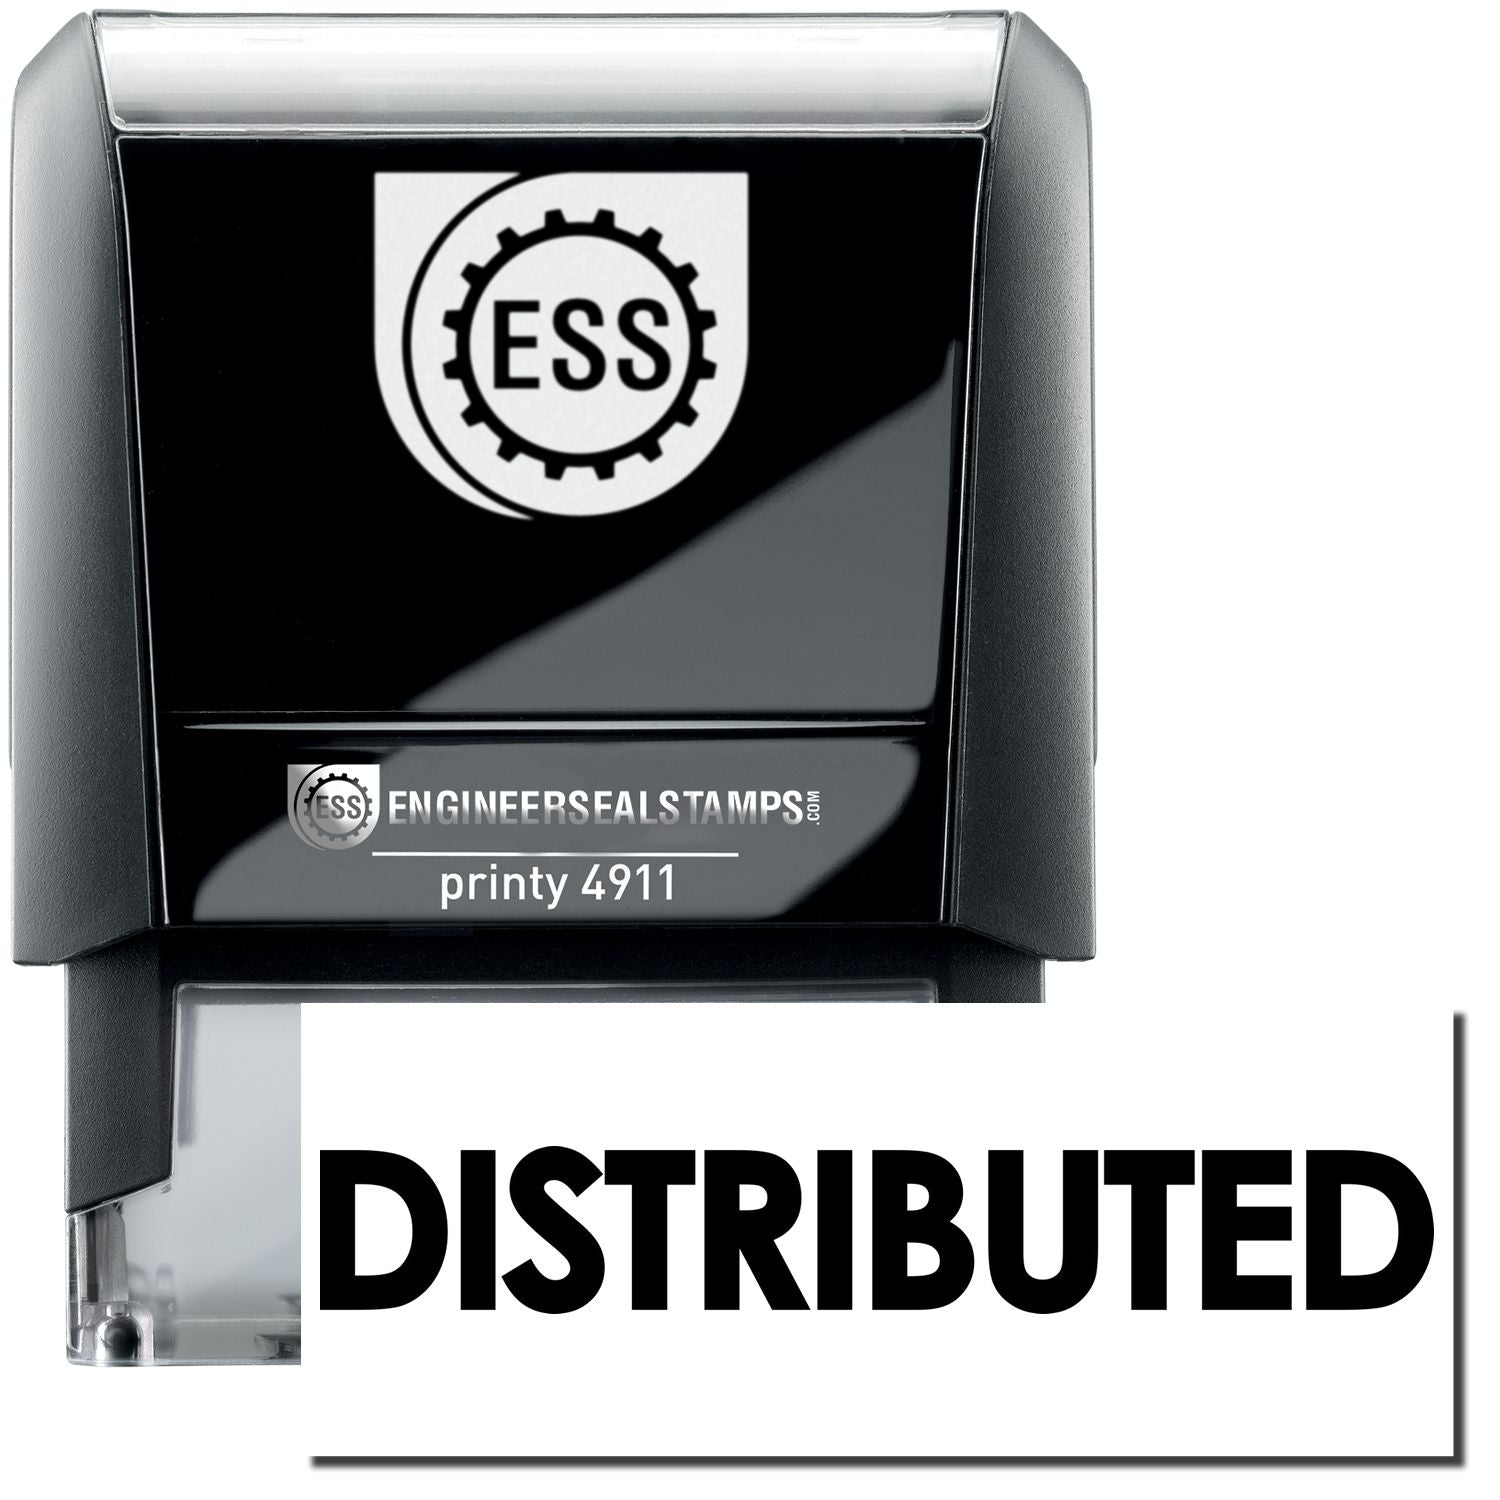 A self-inking stamp with a stamped image showing how the text "DISTRIBUTED" in bold font is displayed after stamping.